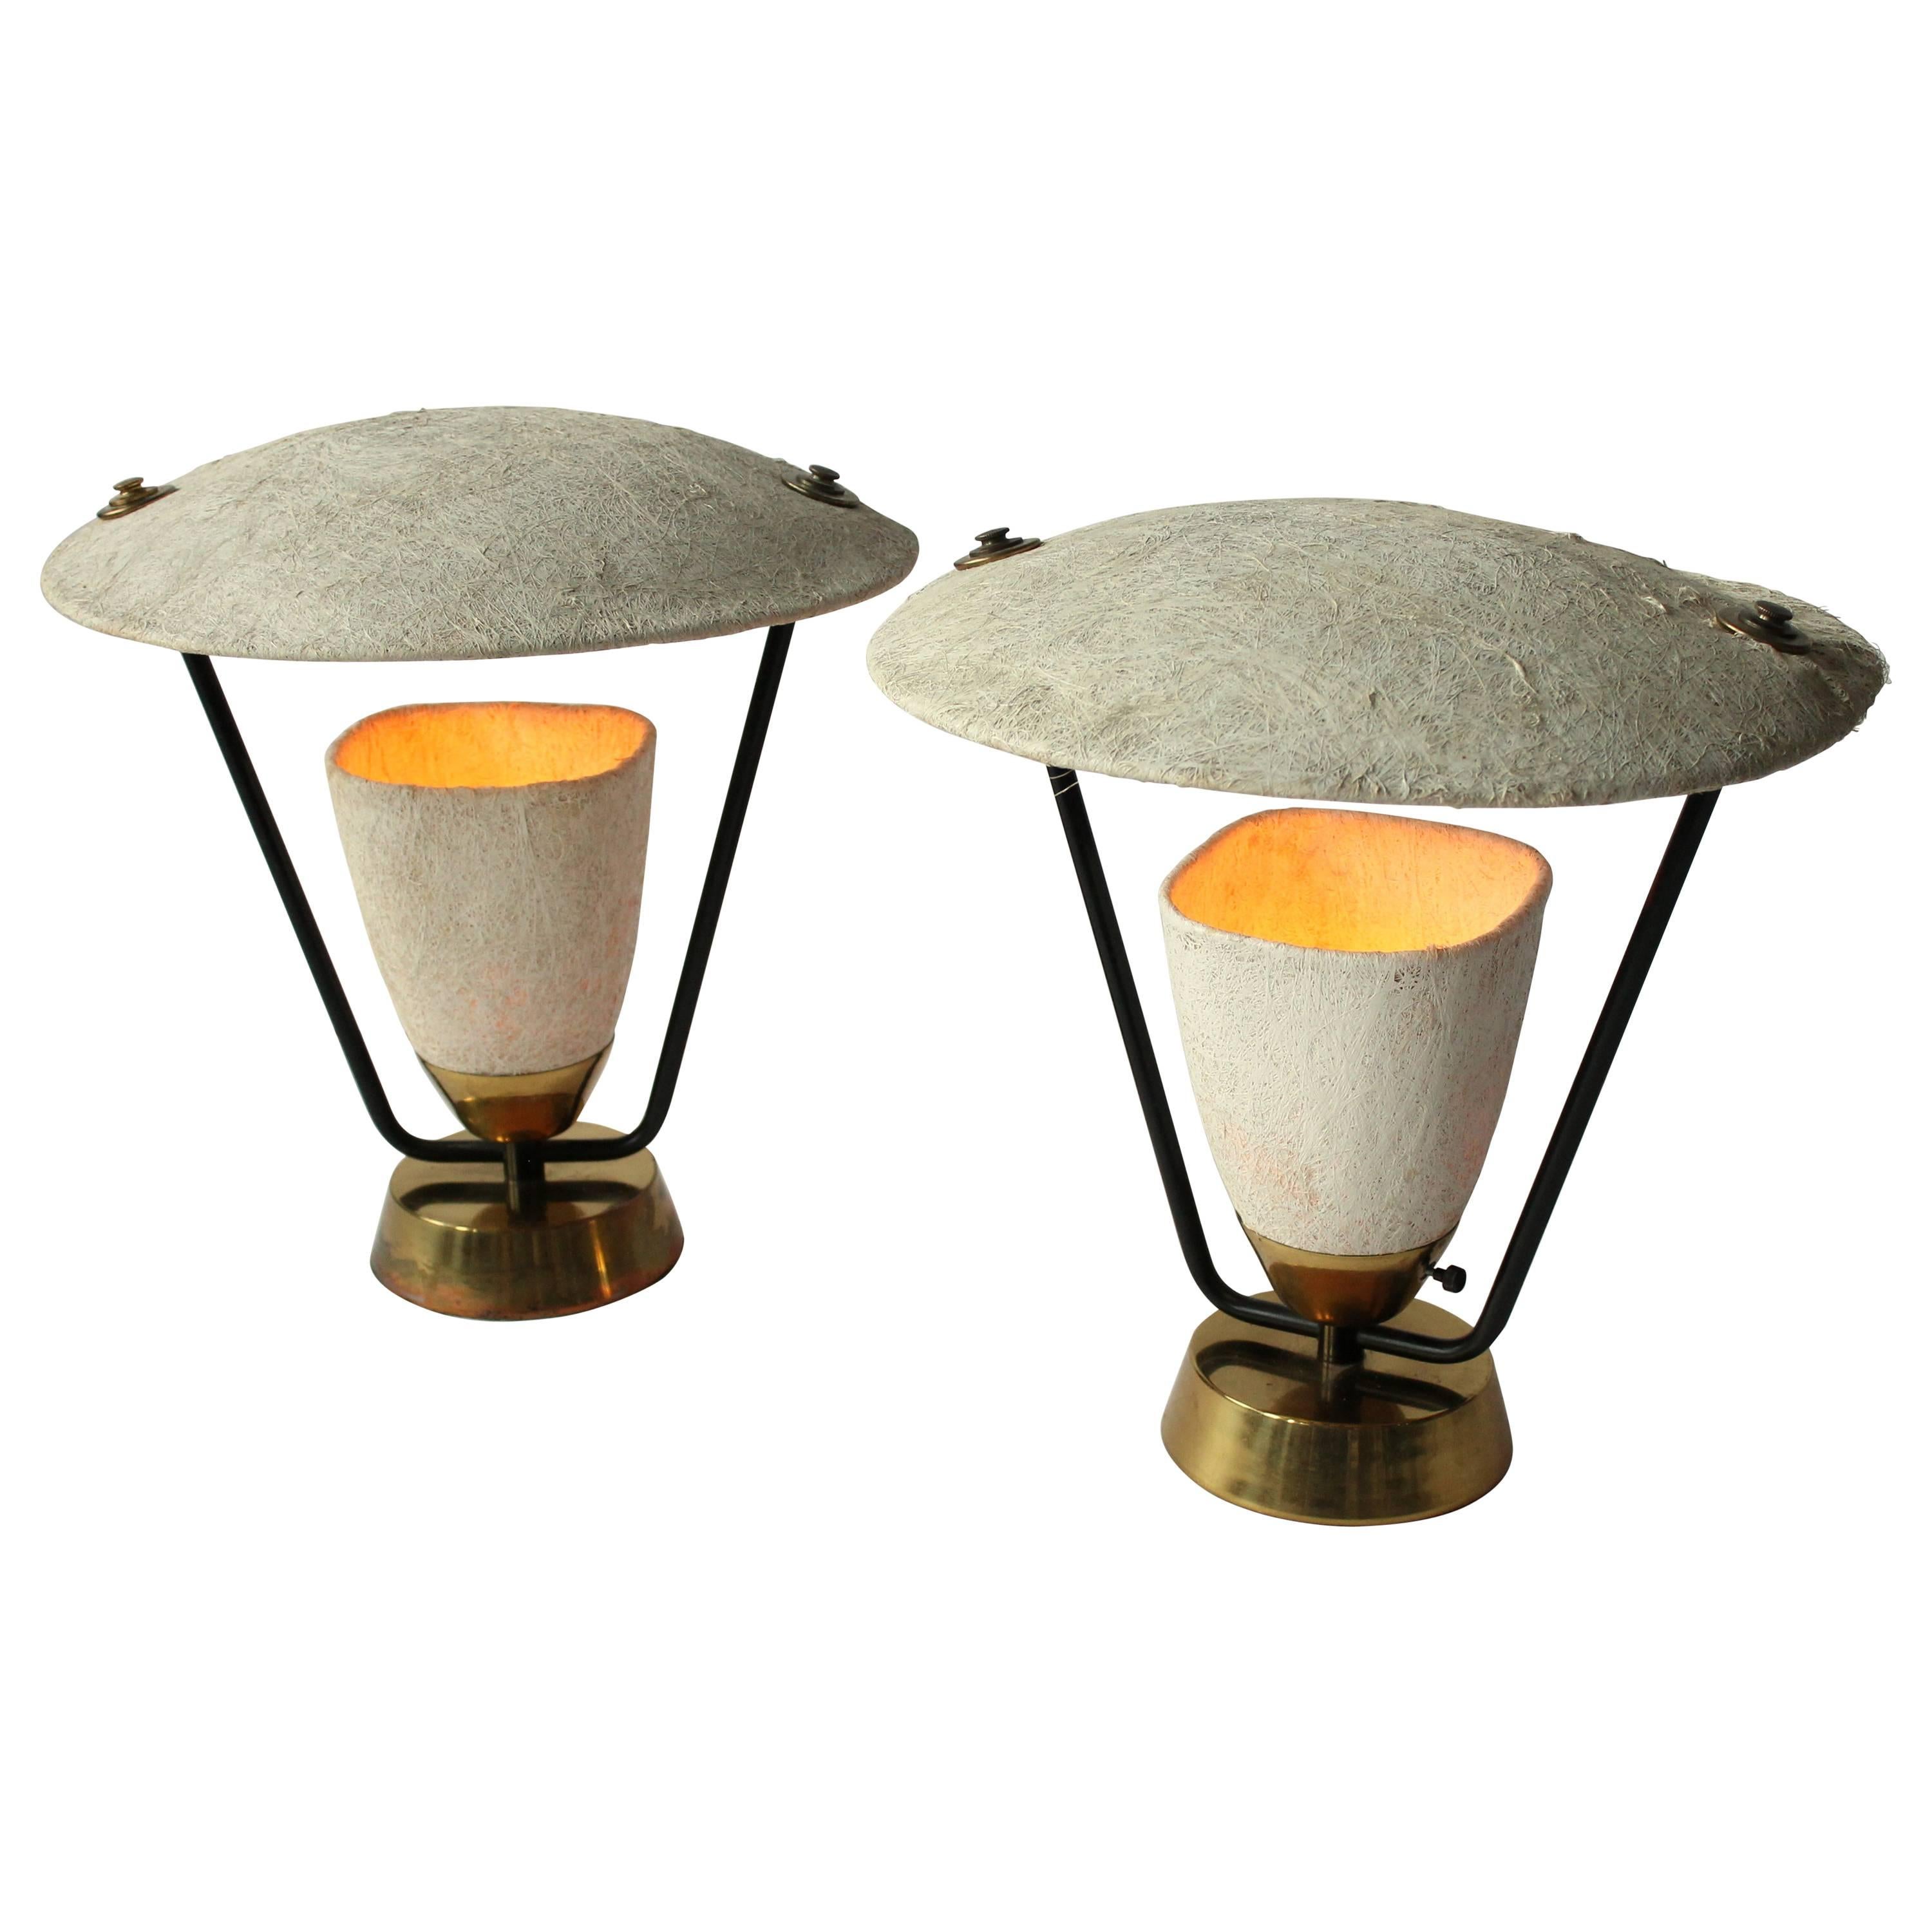 Pair of Raw Fiberglass Table Lamp in the Style of Mitchell Bobrick, 1950s, USA